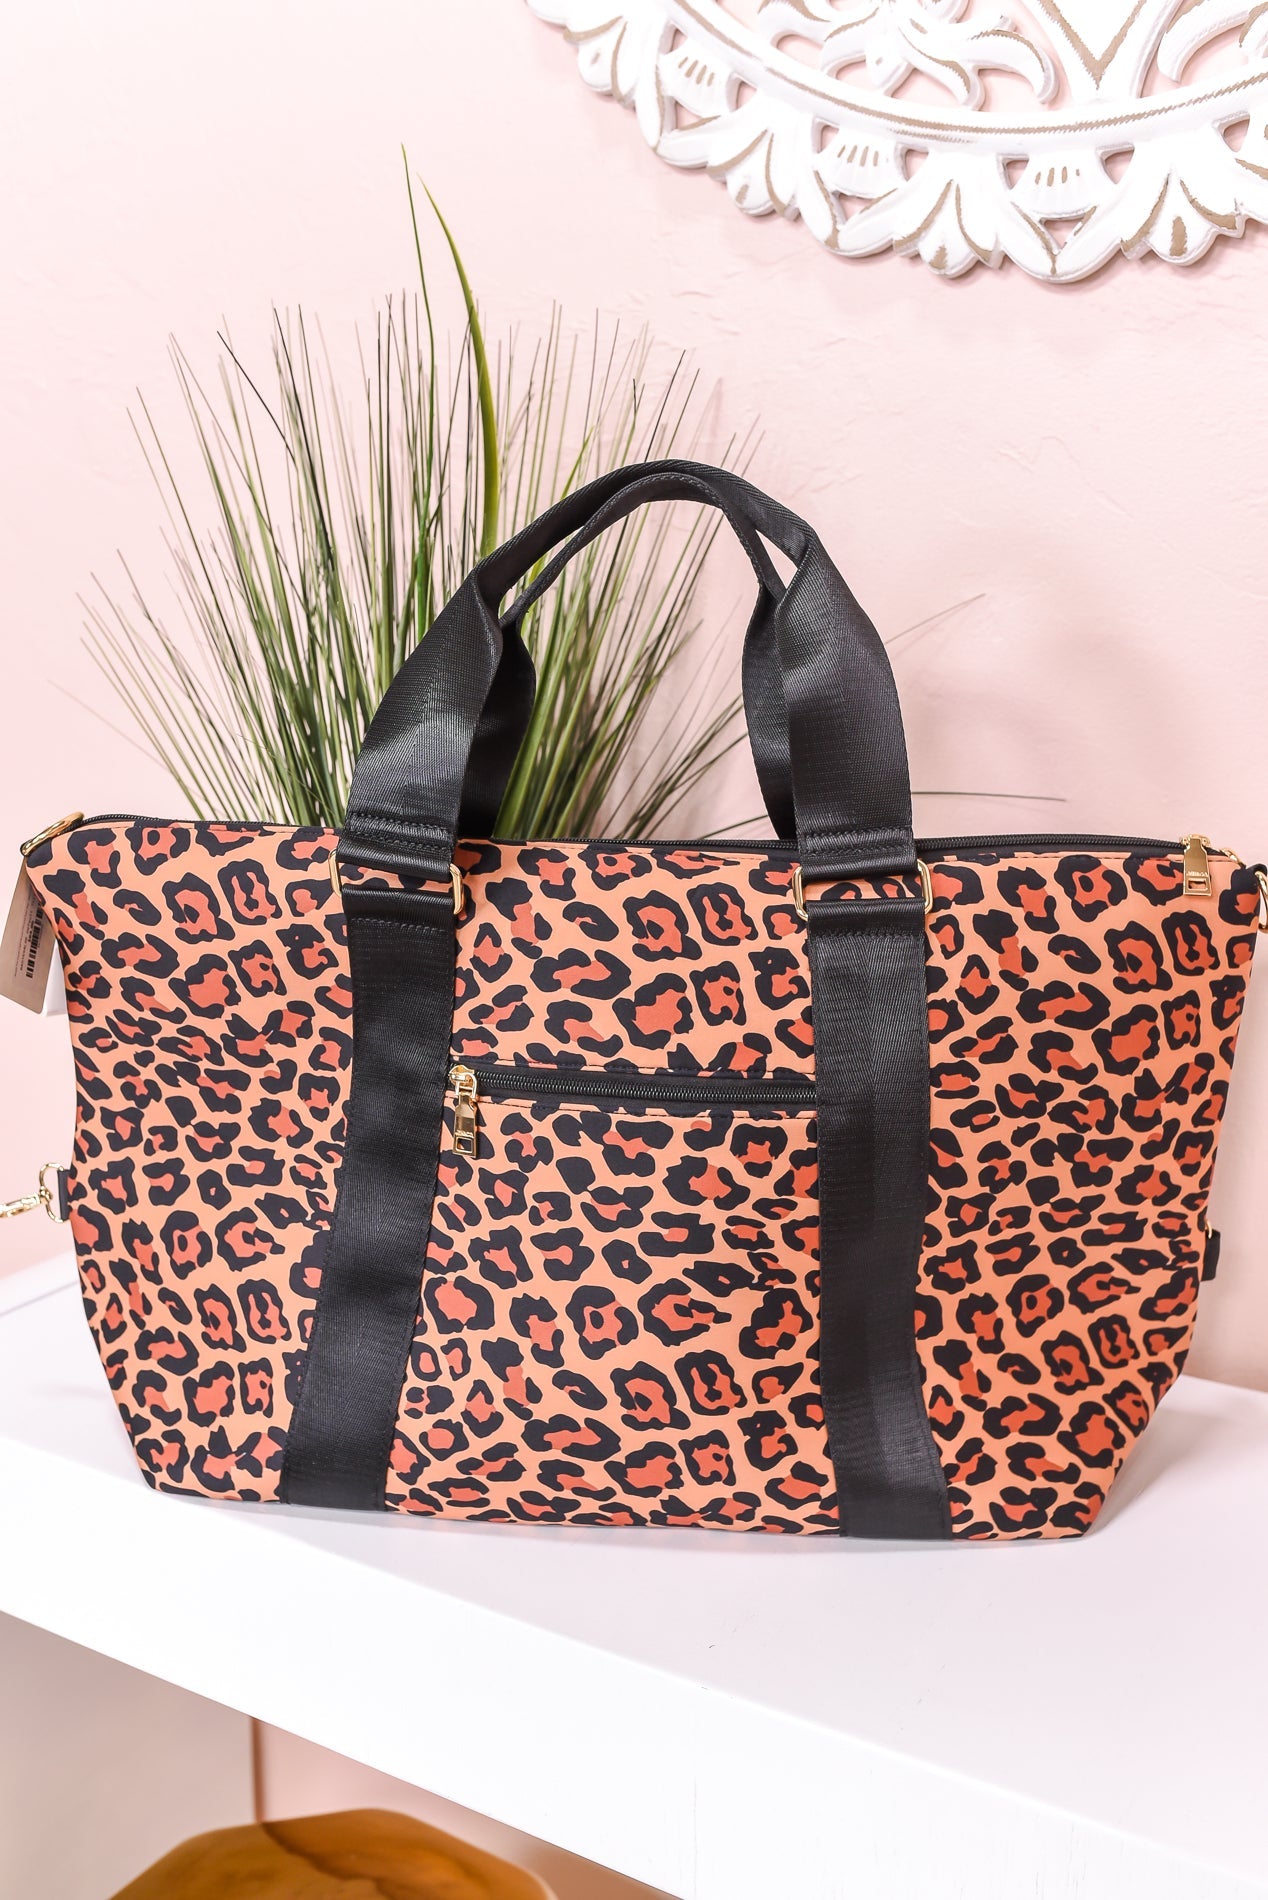 Ready For Vacay Light Brown Printed Tote Bag - BAG1694LBR